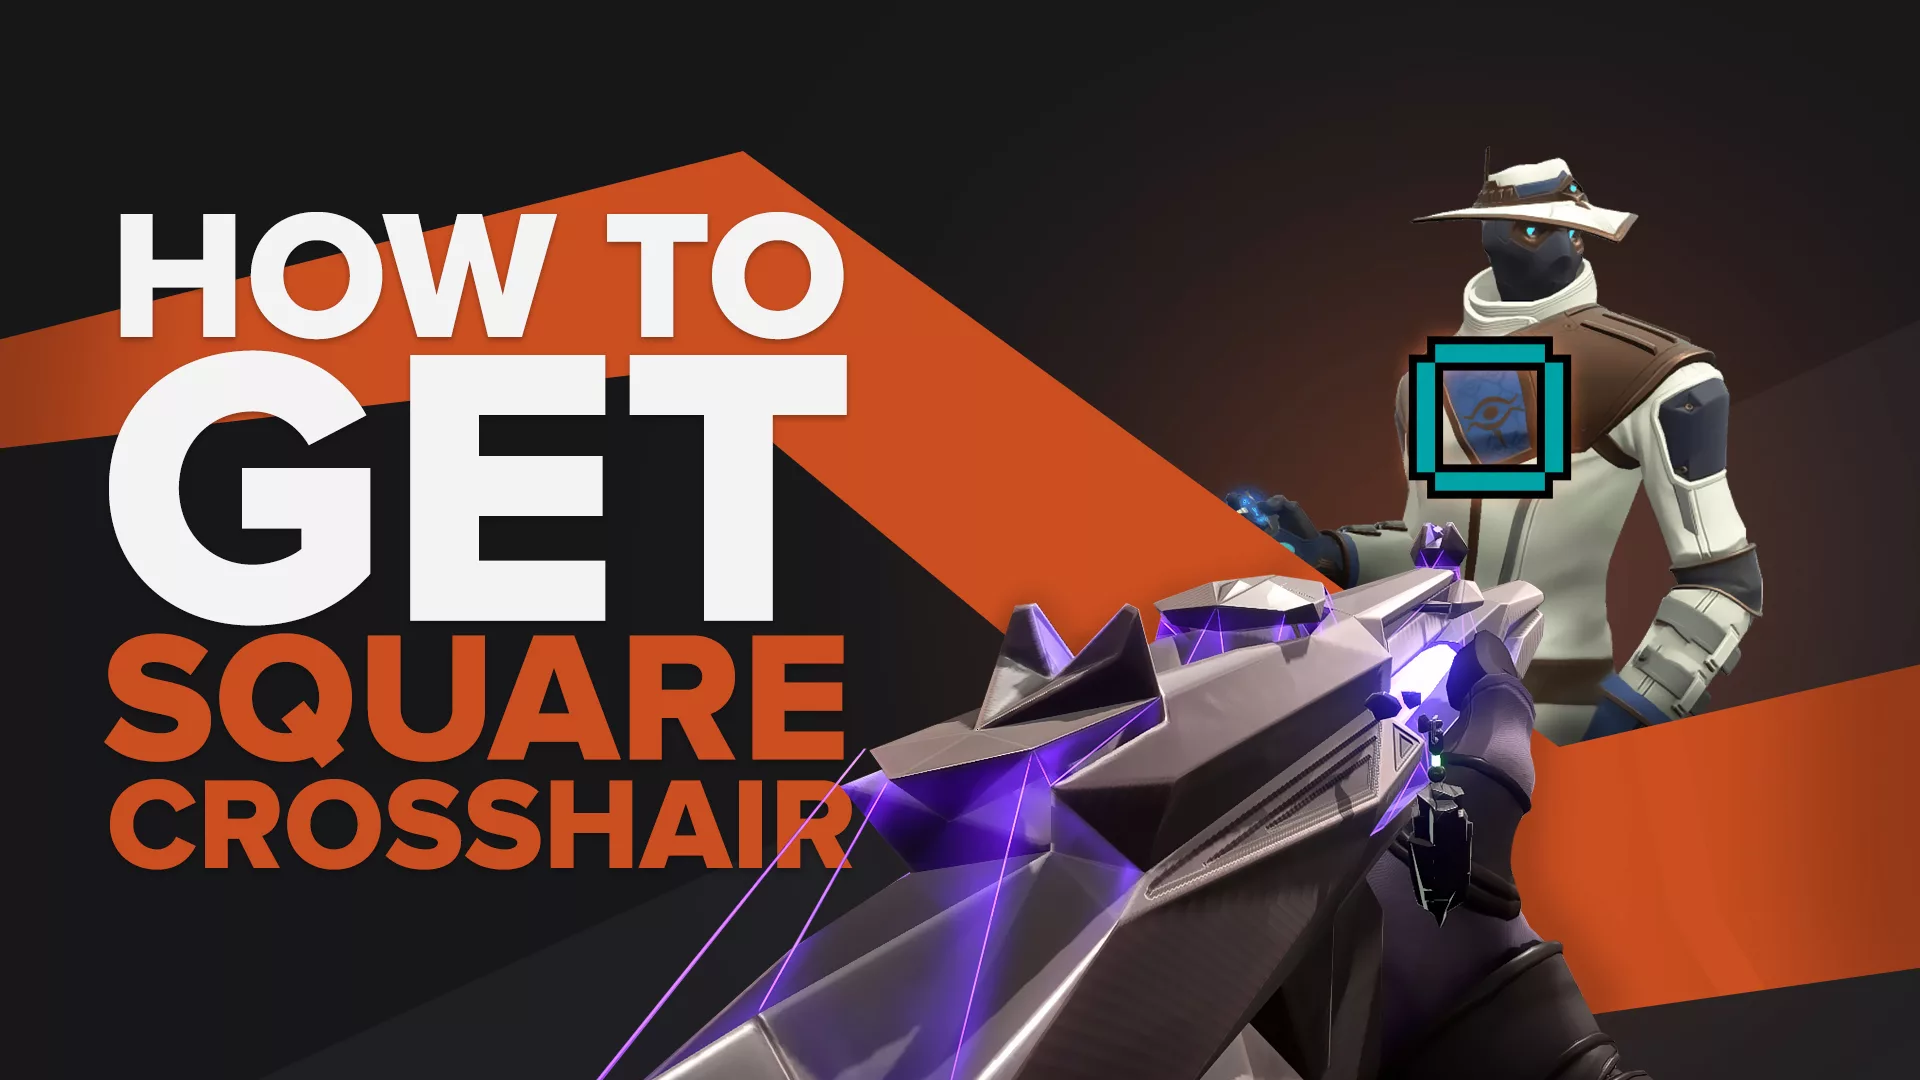 How to get the square crosshair in Valorant